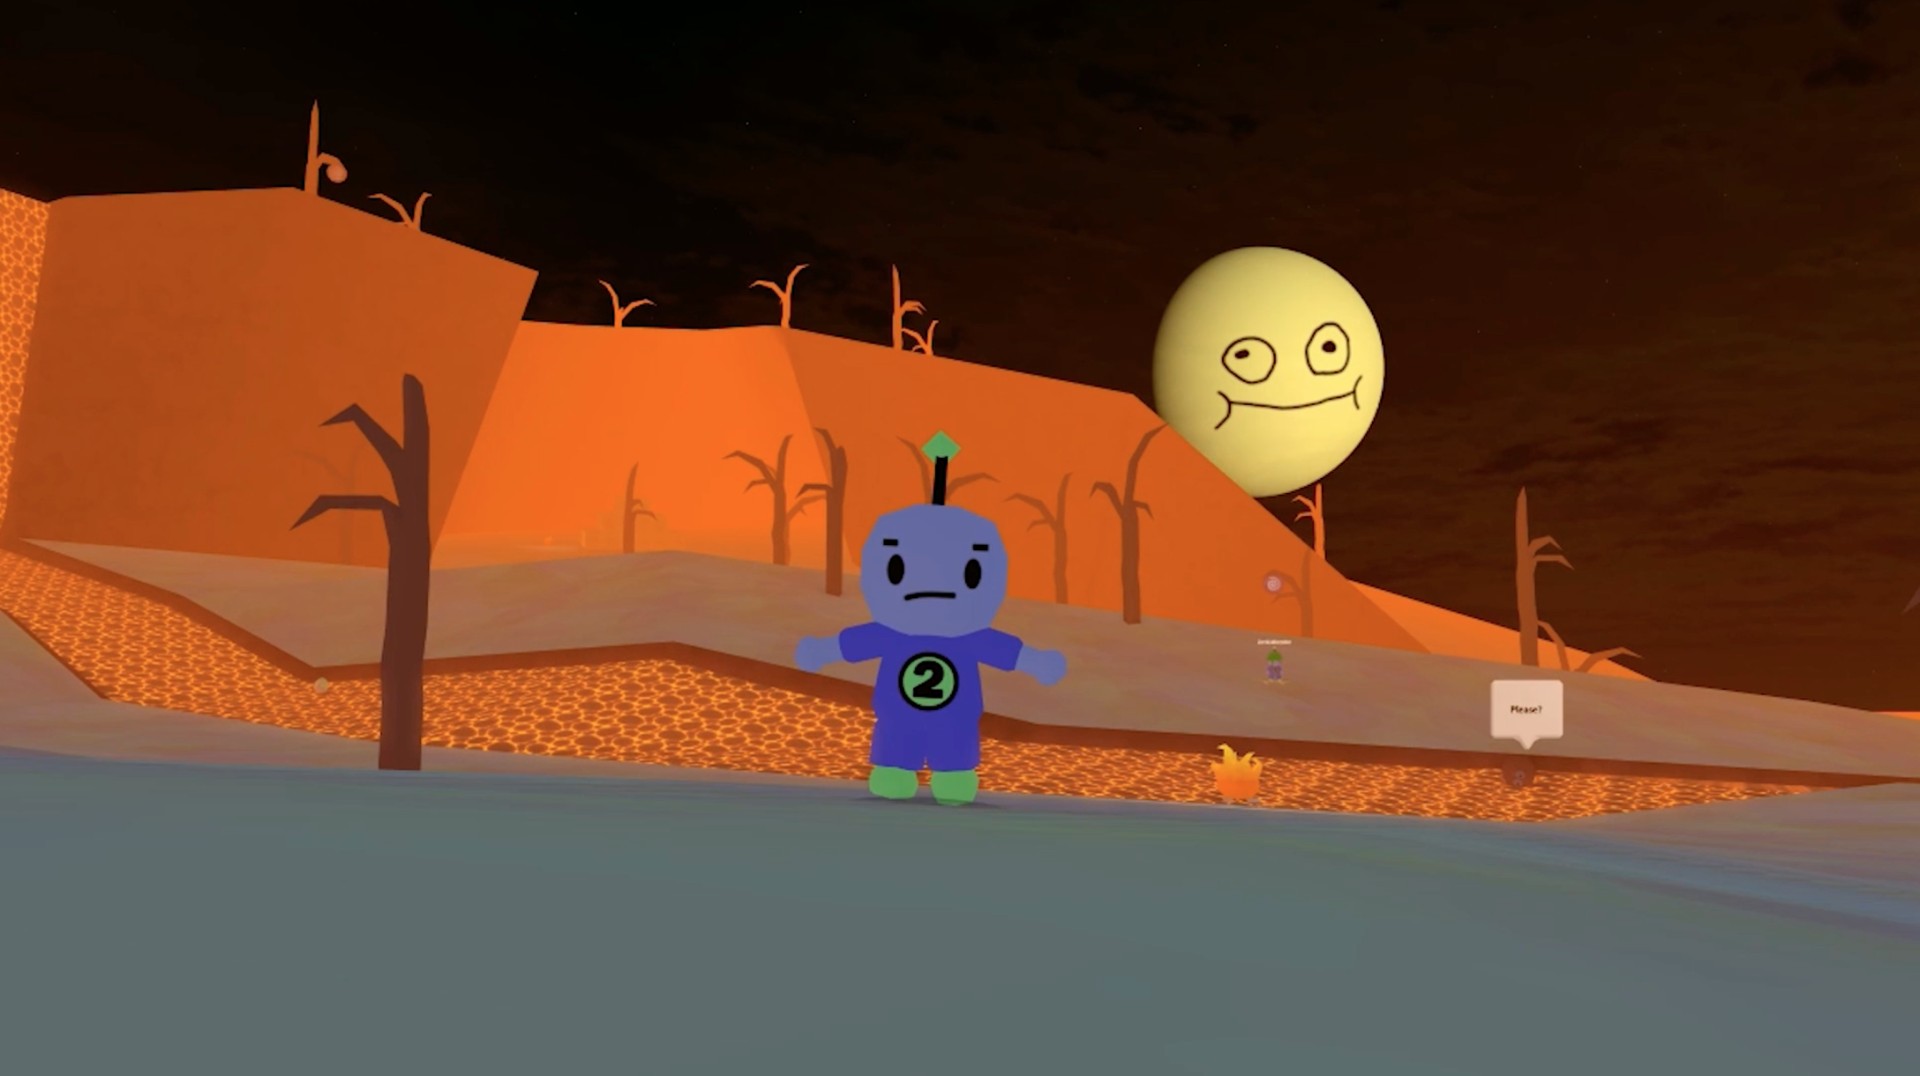 3d Platformer Robot 64 Is Now Available On Roblox For Xbox One Xbox Wire - skittle studios roblox